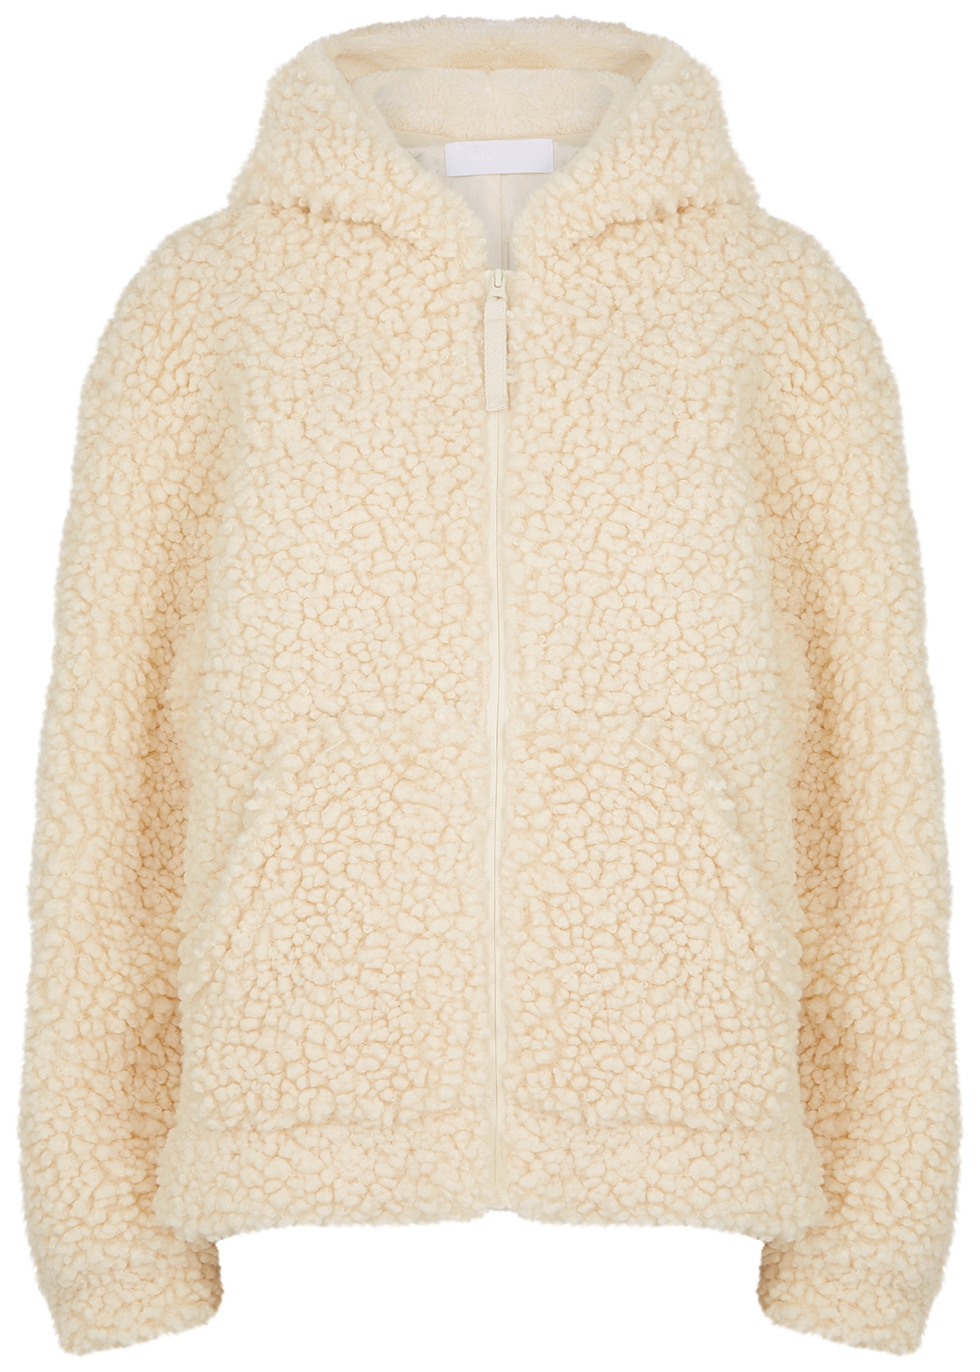 Cream hooded faux shearling jacket